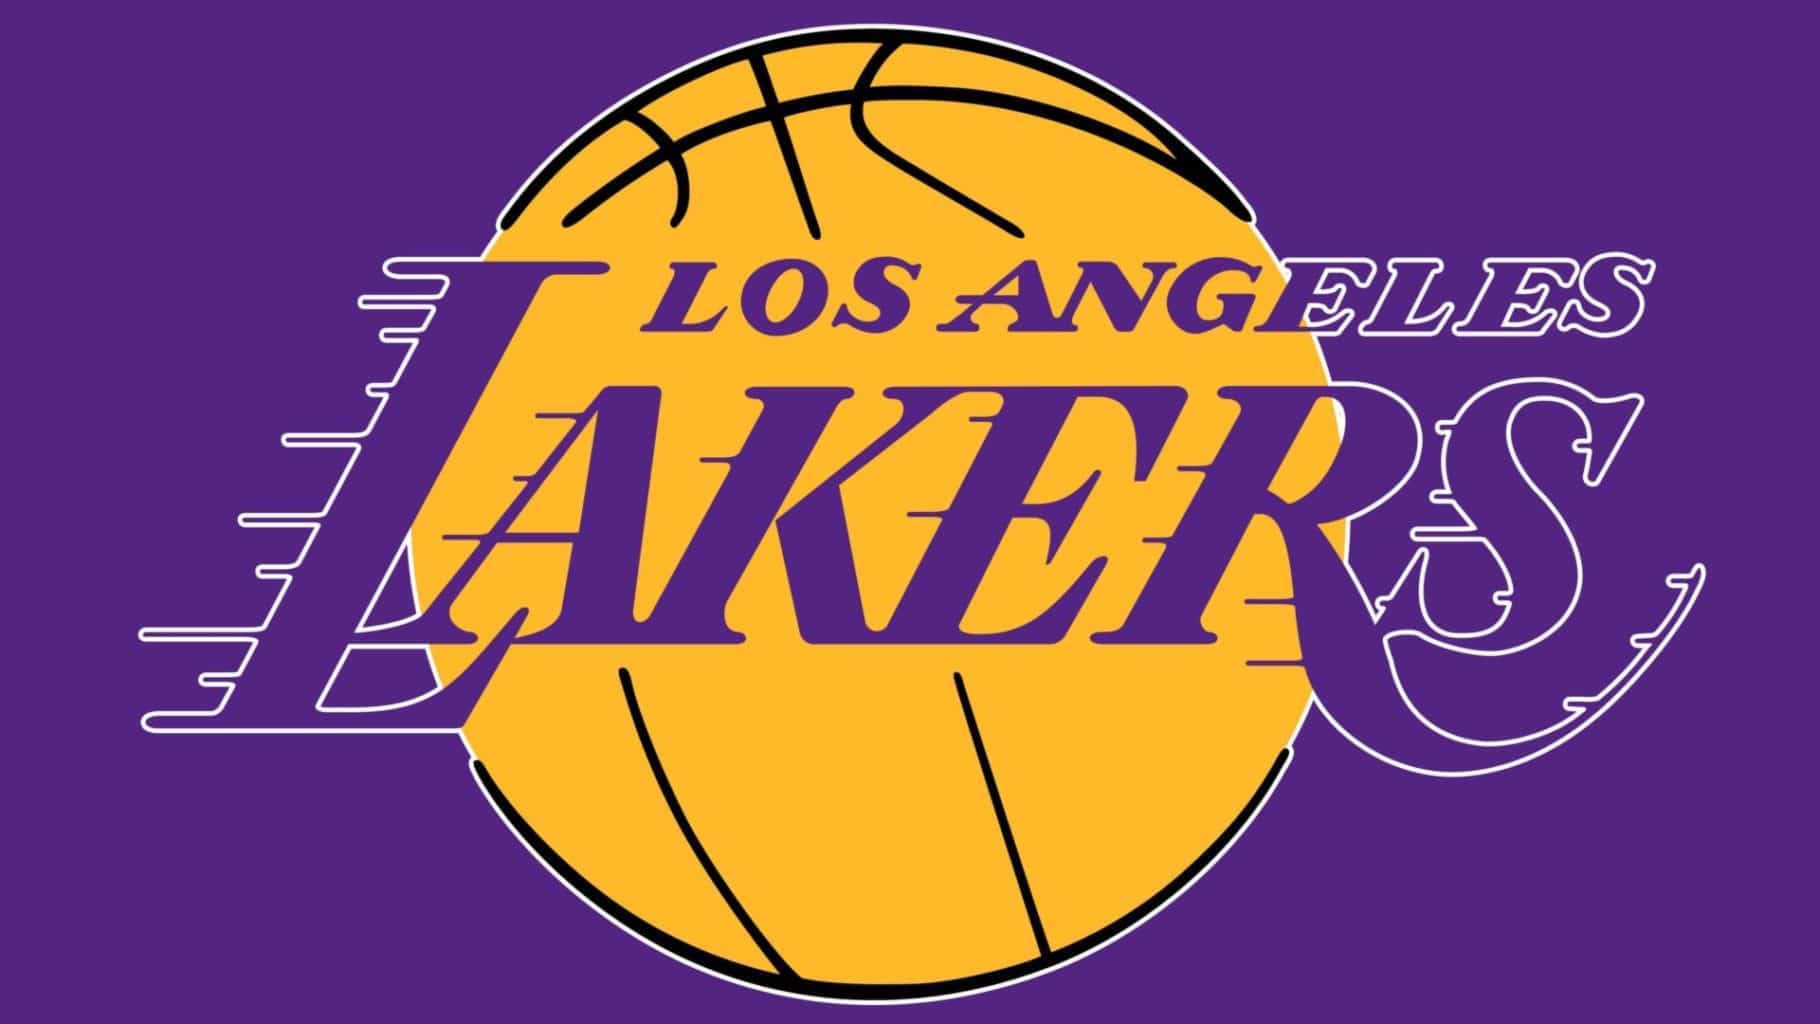 4 Lakers to Watch This Season